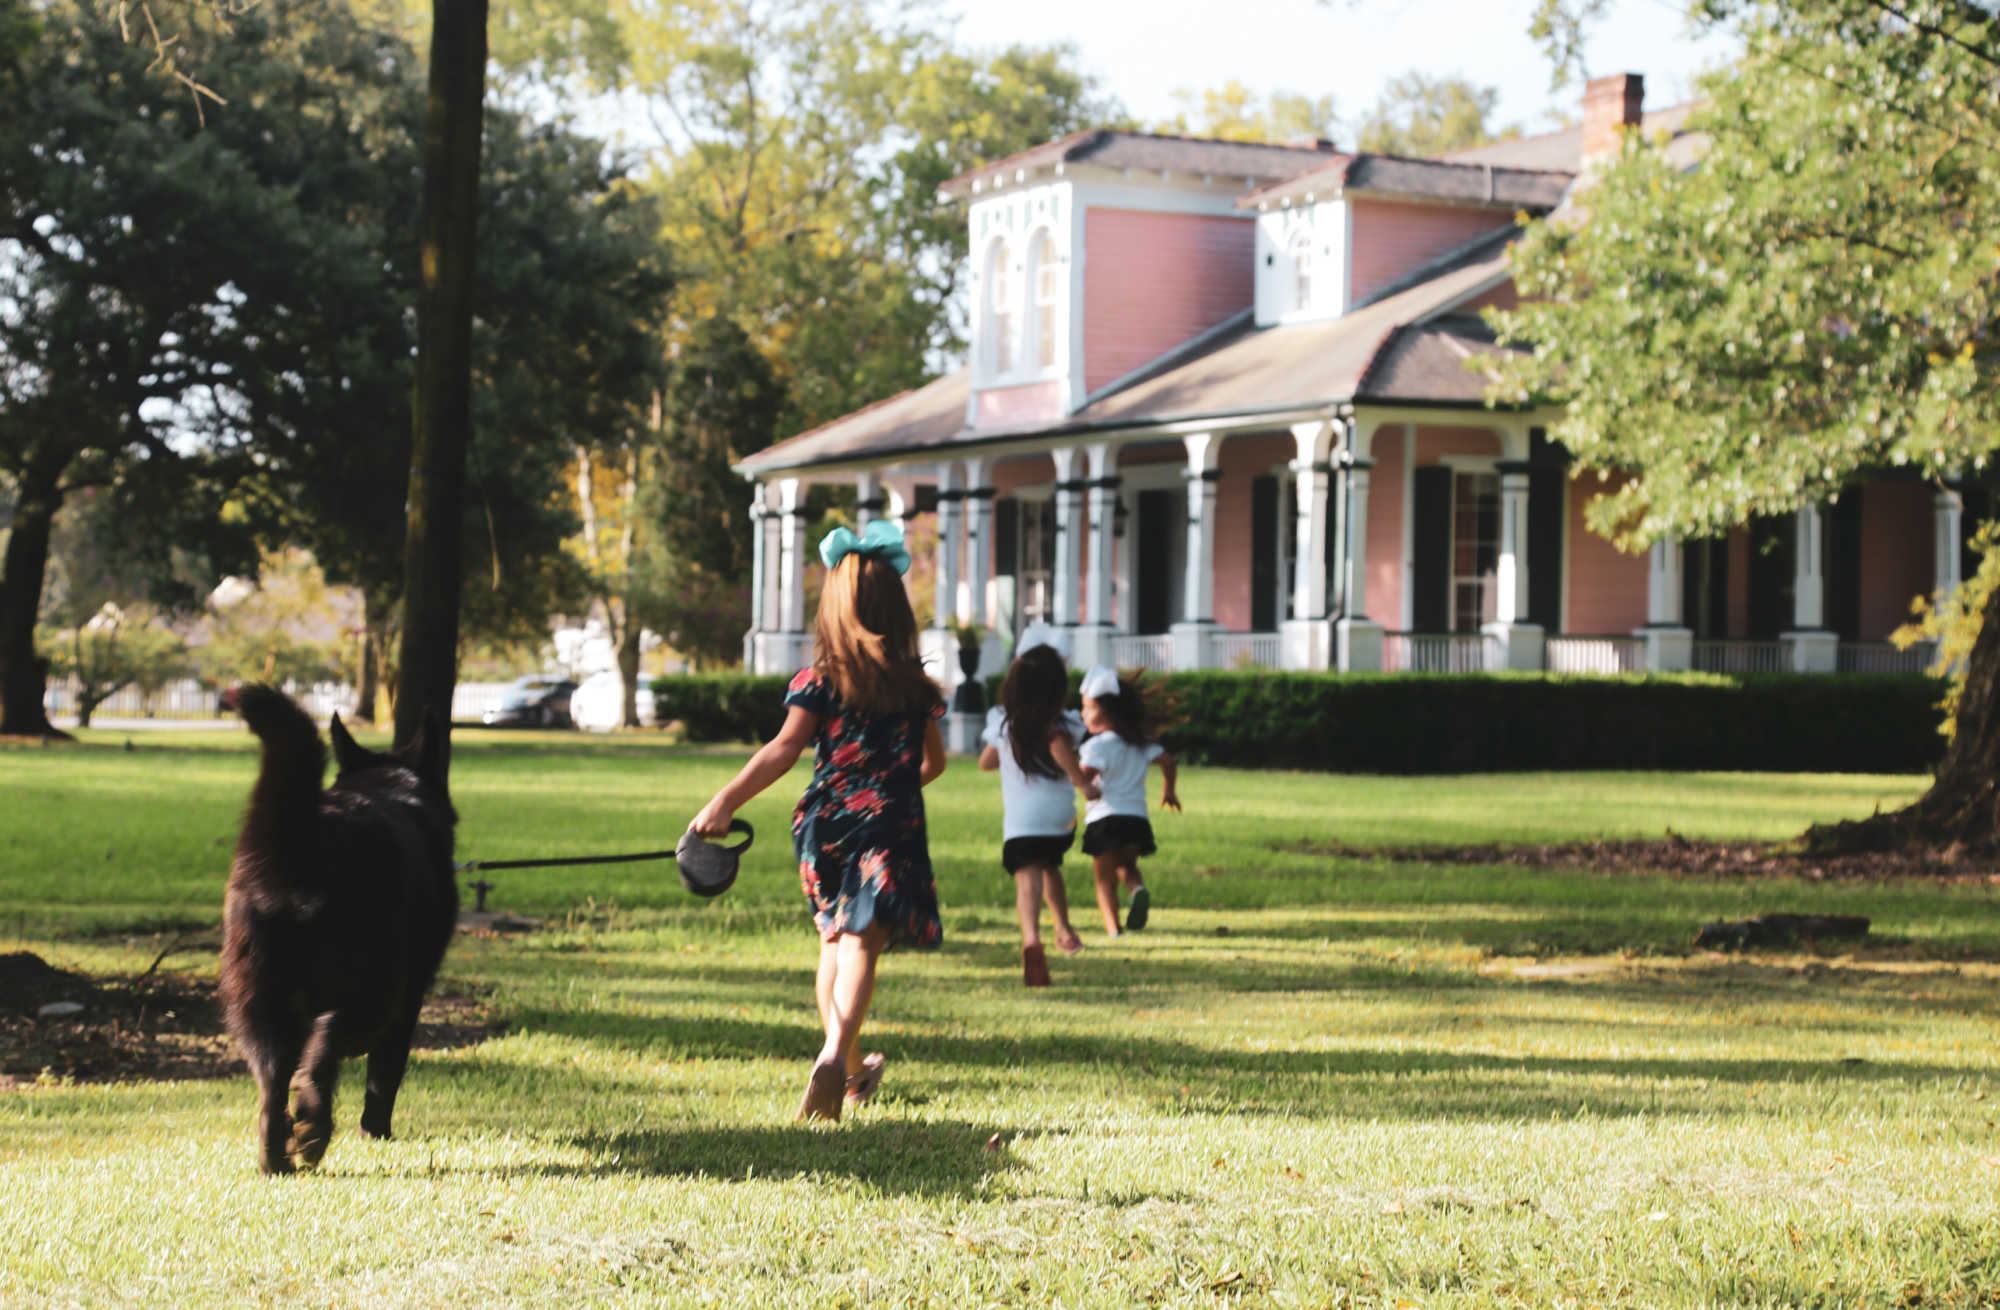 Children run and frolic on the lawn at Poche Plantation